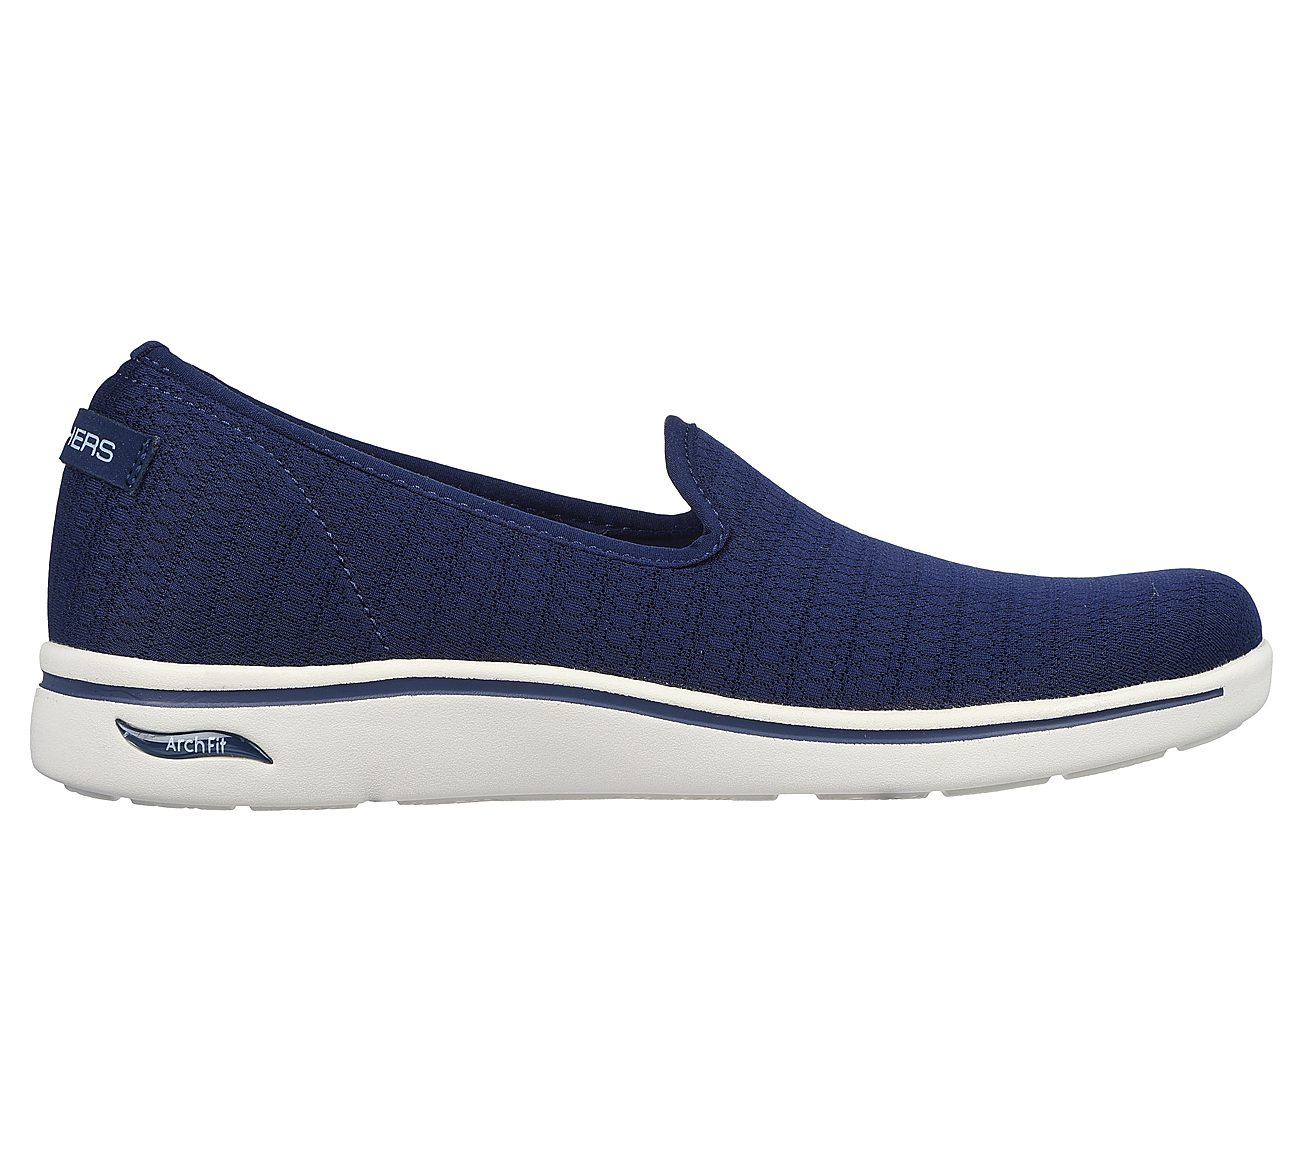 Skechers Navy Arch-Fit-Uplift Slip On Shoes For Women - Style ID ...